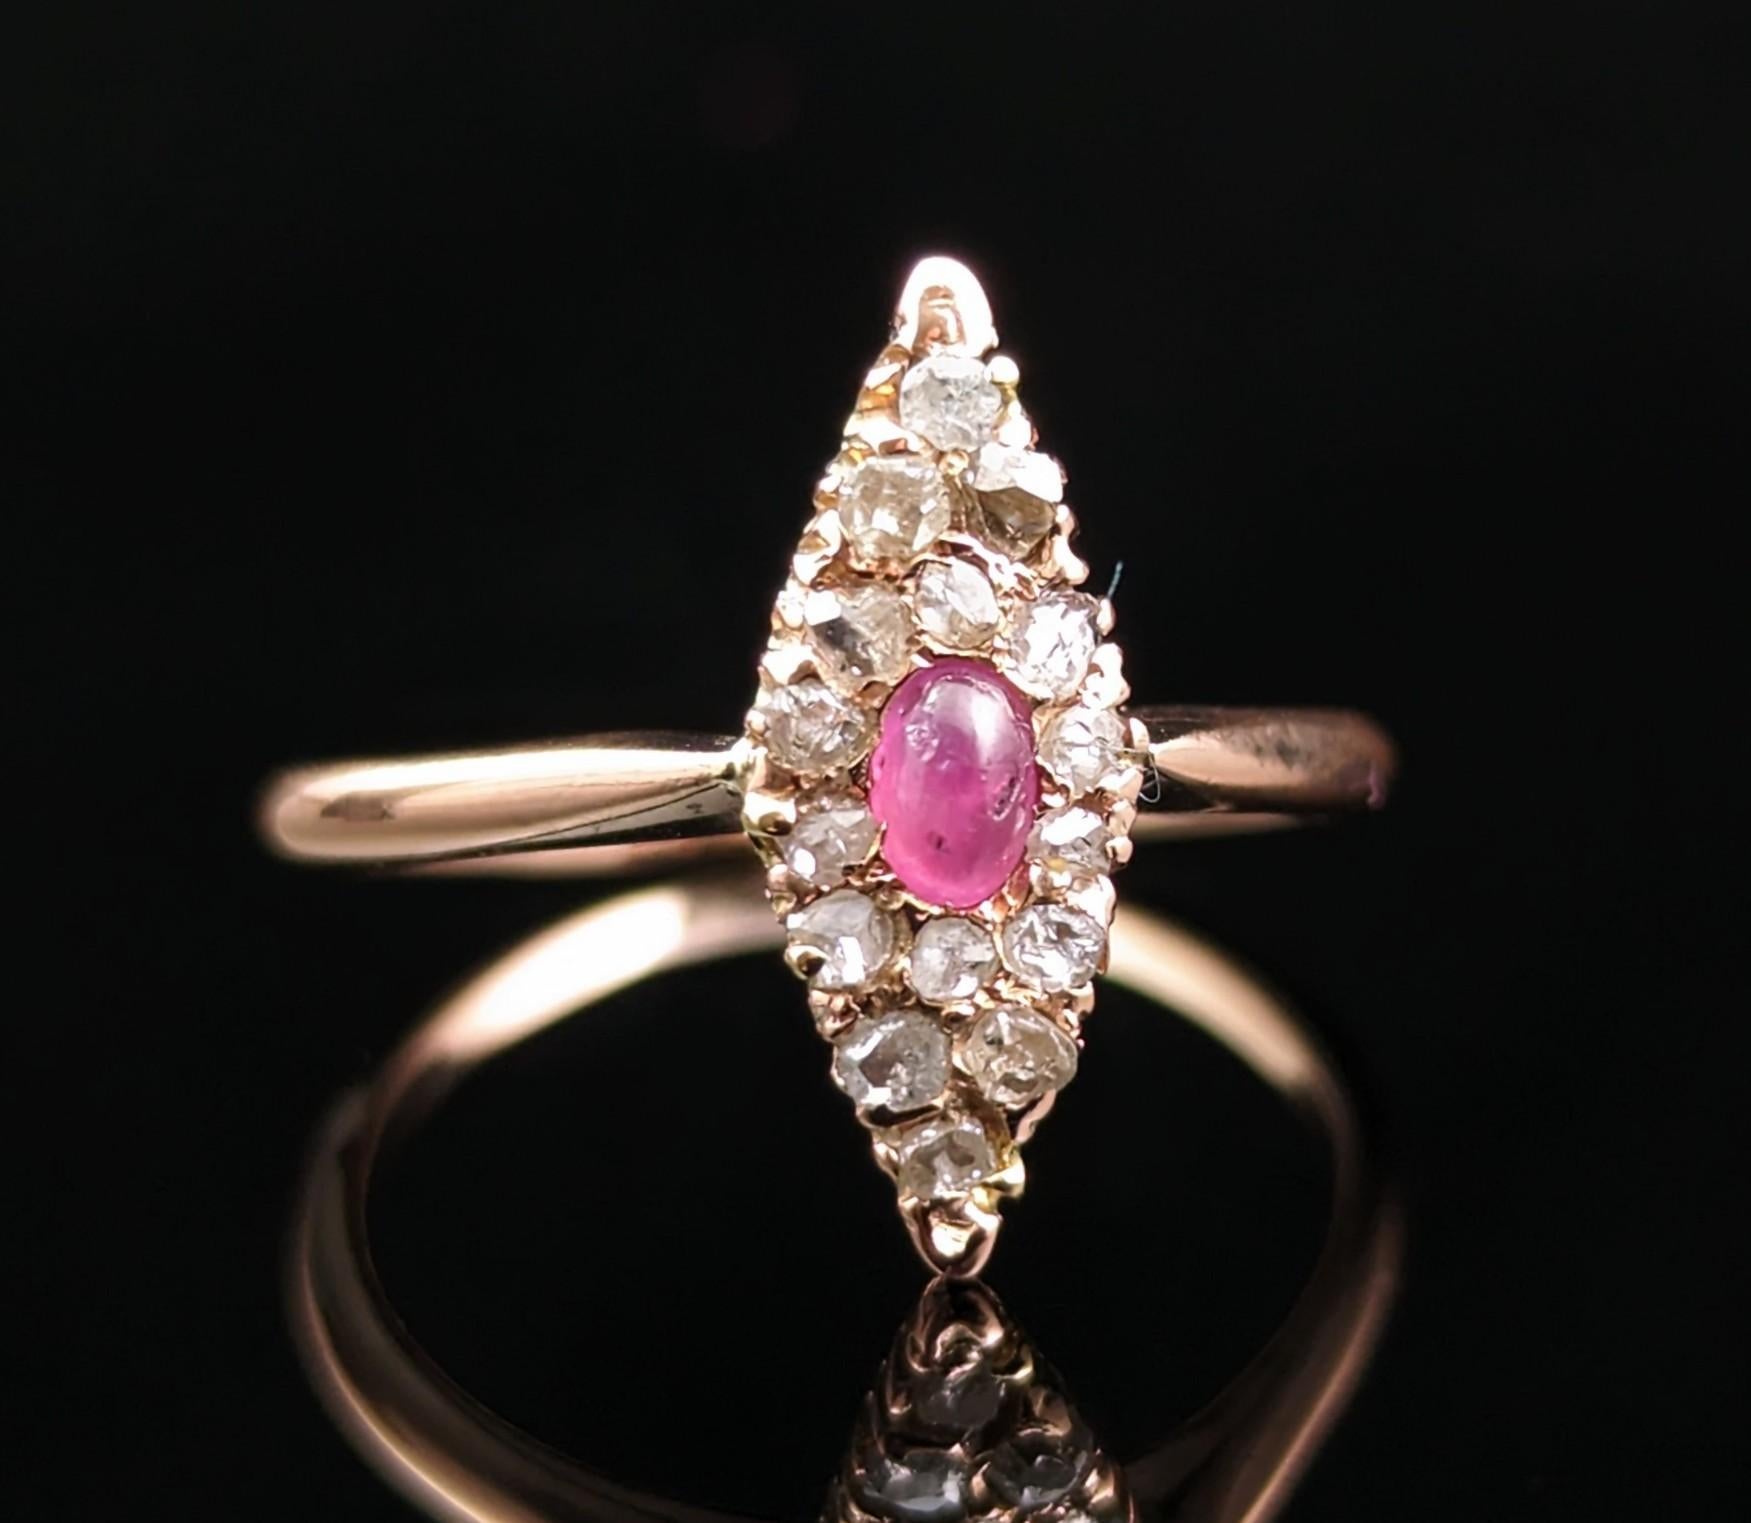 This stunning vintage Ruby cabochon and rose cut diamond navette ring is definitely a beauty!

A central pinky red cabochon ruby surrounded by lashings of twinkling rose cut diamonds, the diamonds giving that beautiful mystical twinkle in low light